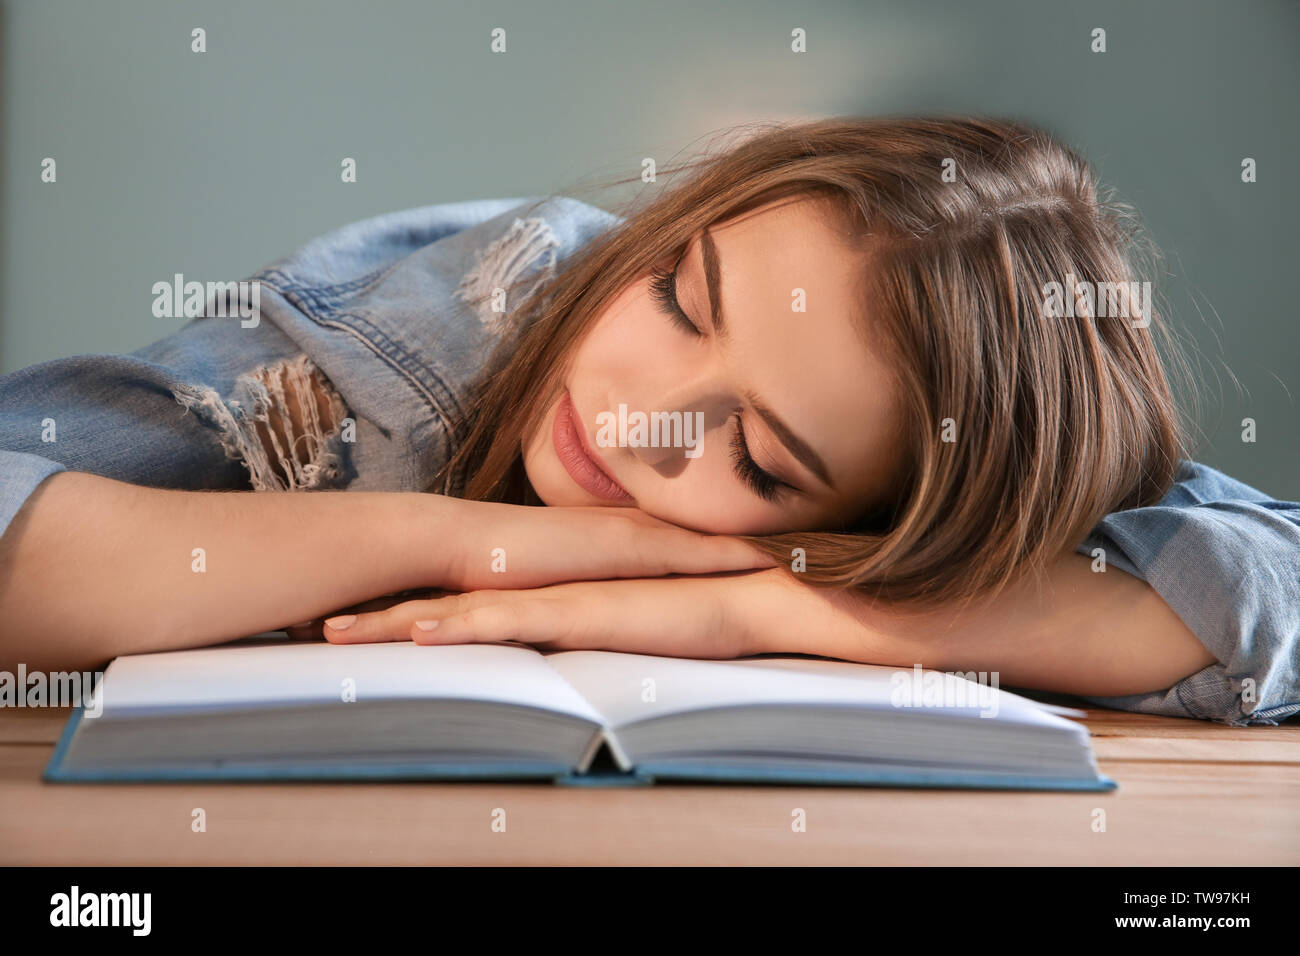 Tired student sleeping at her desk. Preparing for exam Stock Photo